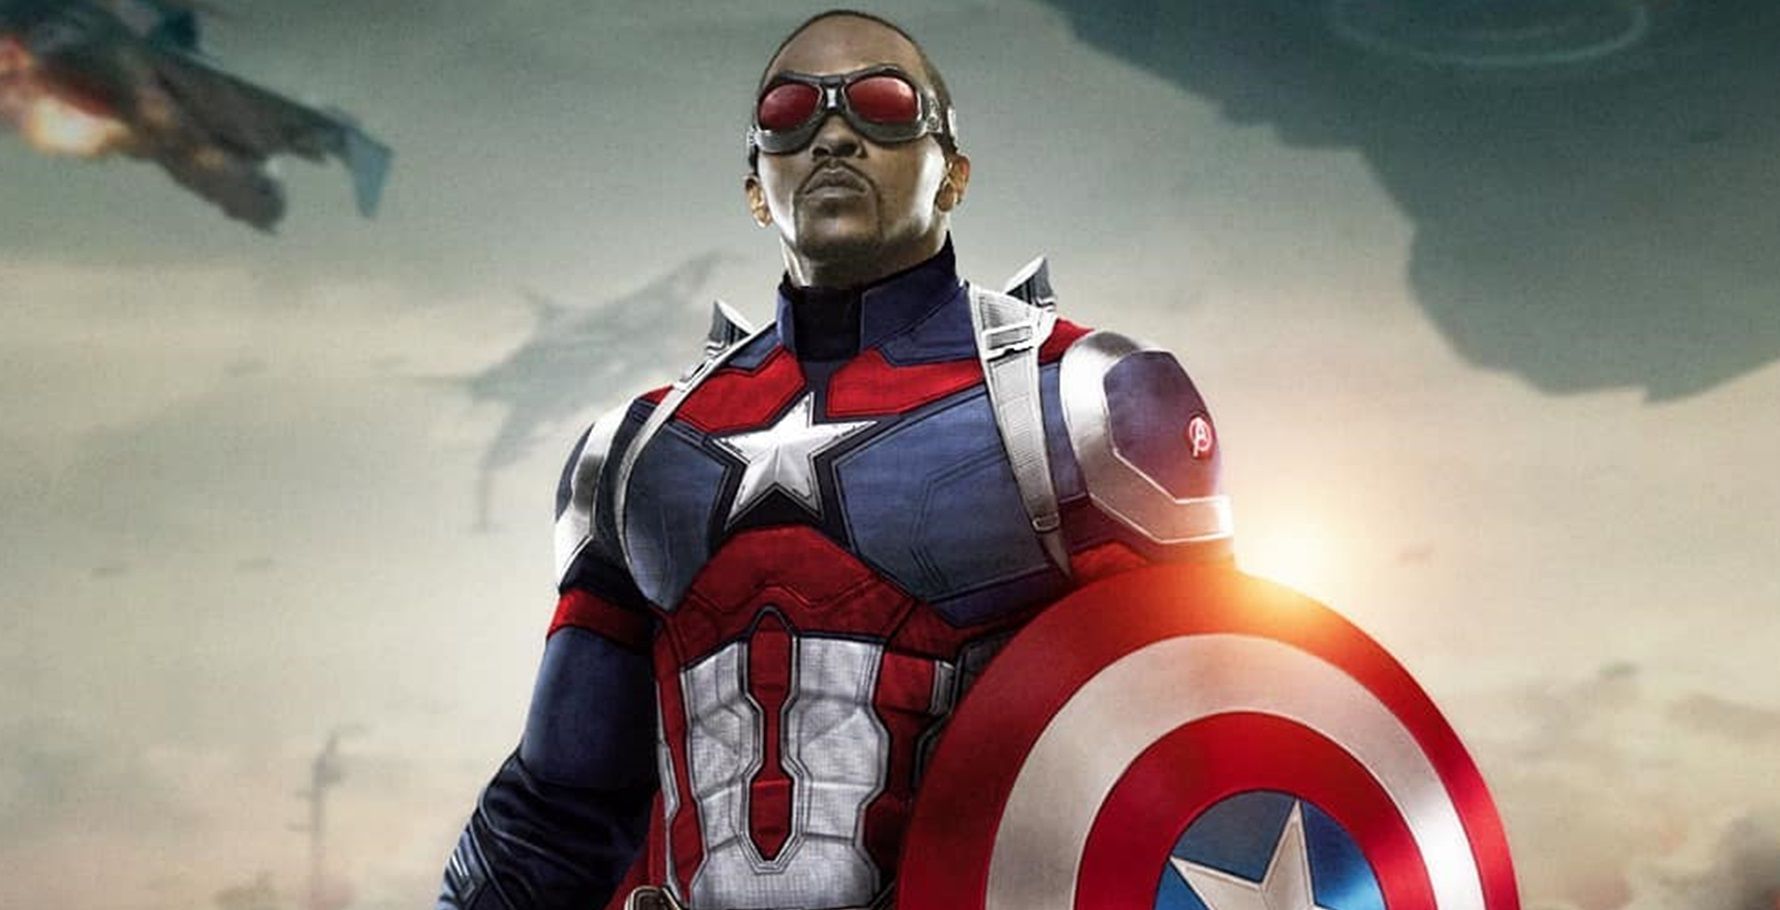 'Captain America 4' in development confirmed by The Falcon and the Winter Solider's screenwriter!